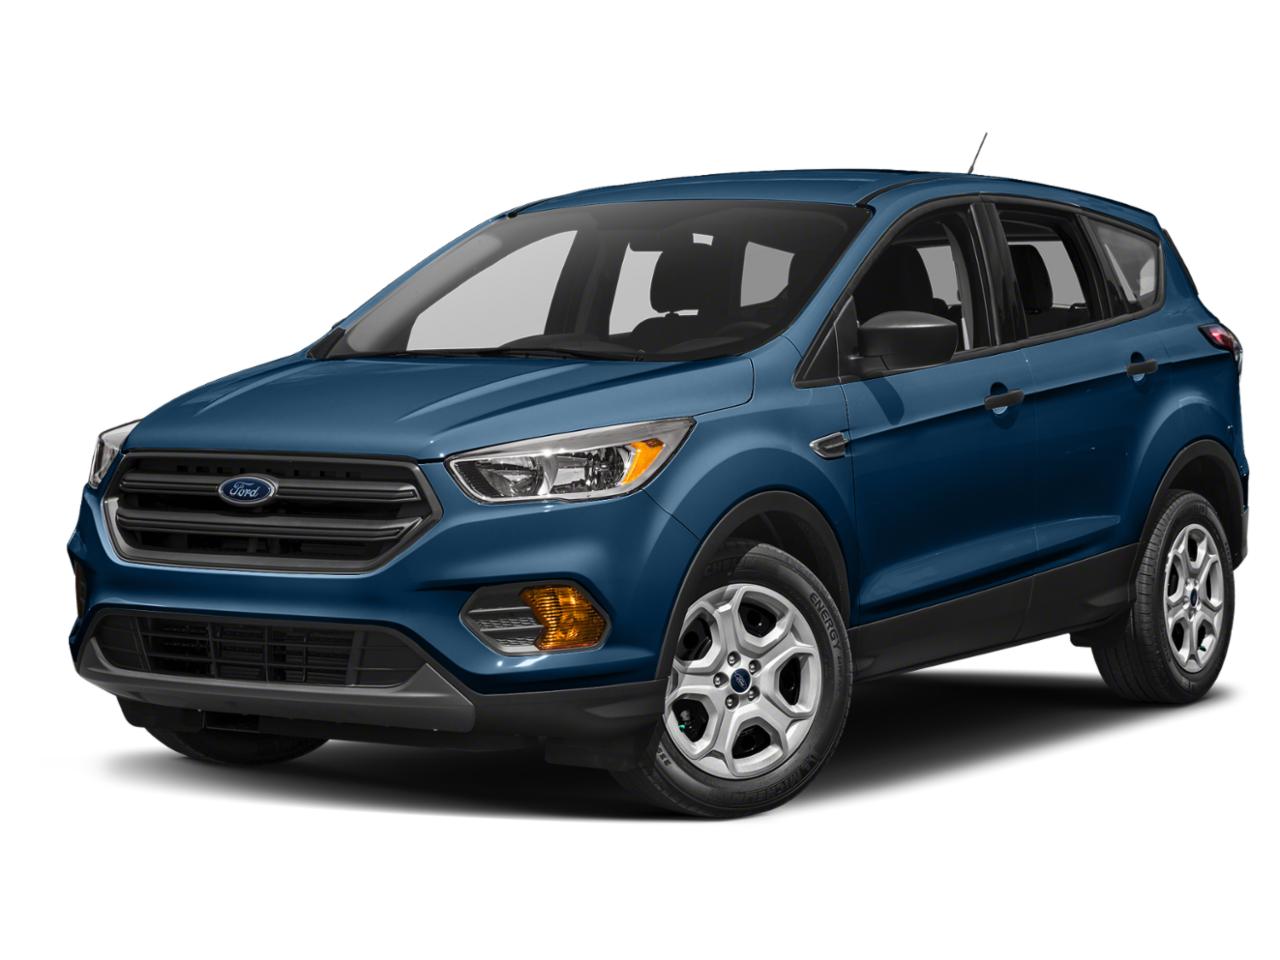 2019 Ford Escape Vehicle Photo in Bethlehem, PA 18017